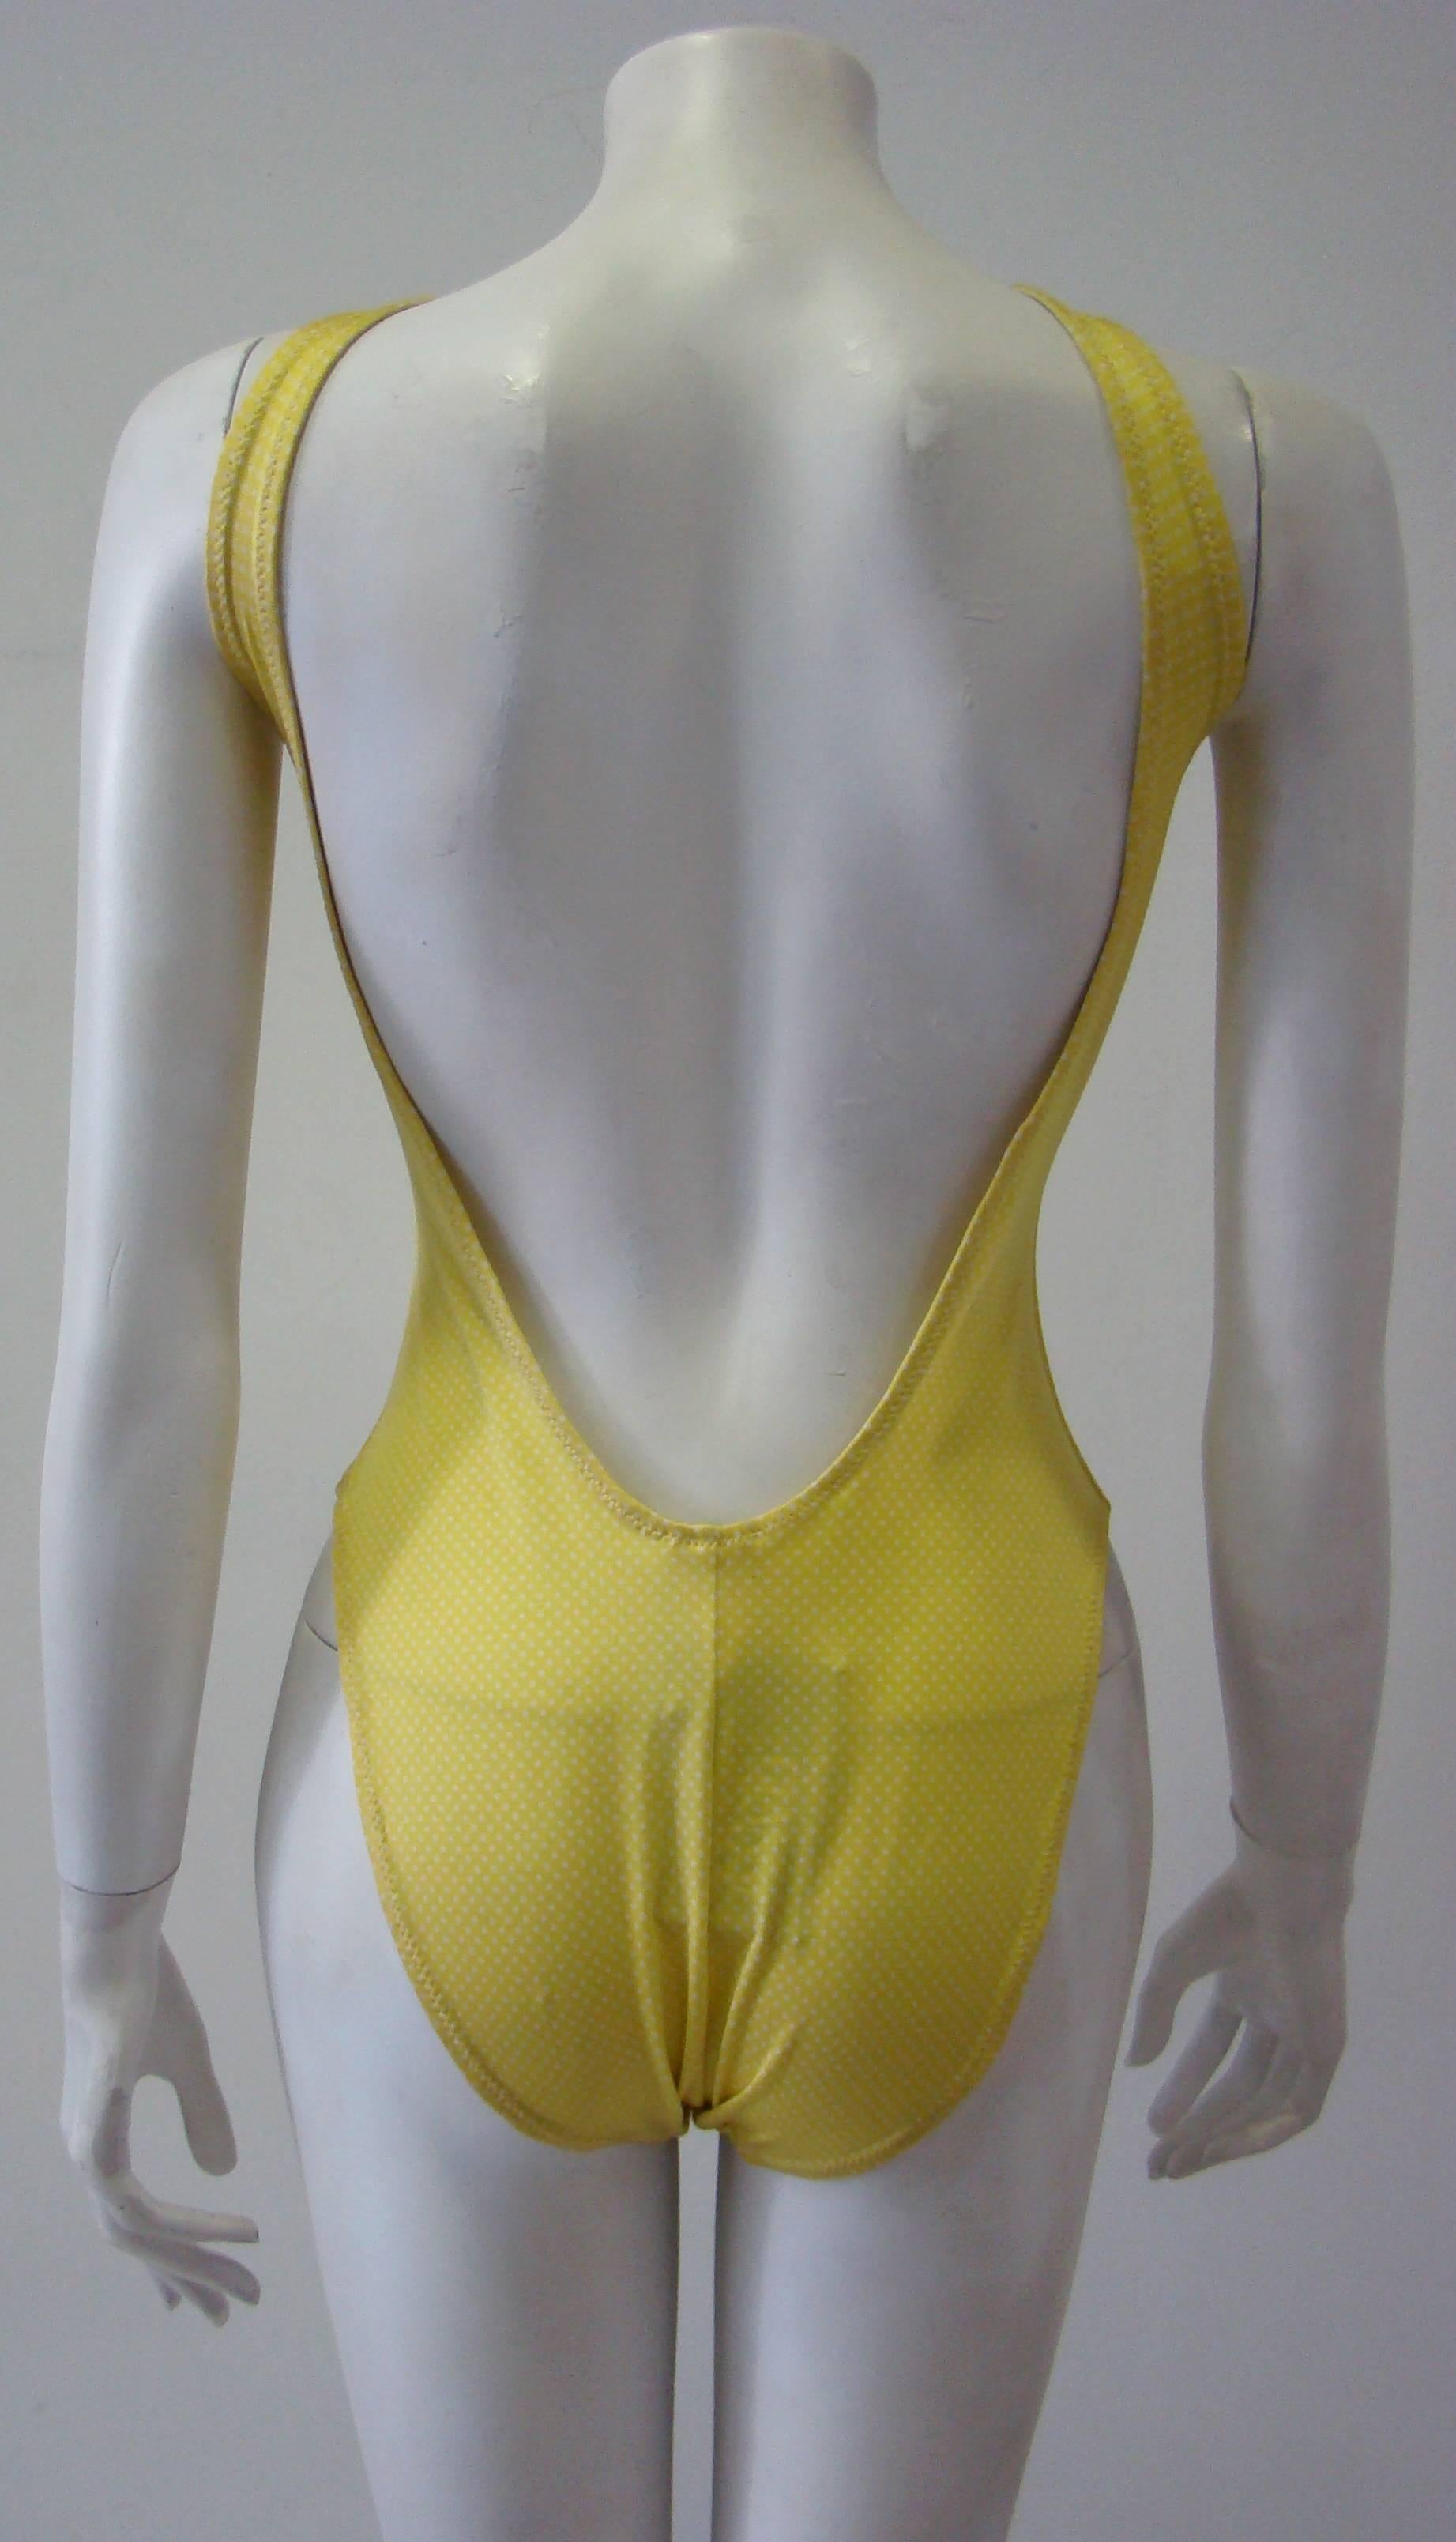 Women's Gianni Versace Mare Lemon Bathing Suit With White Polka Dots For Sale